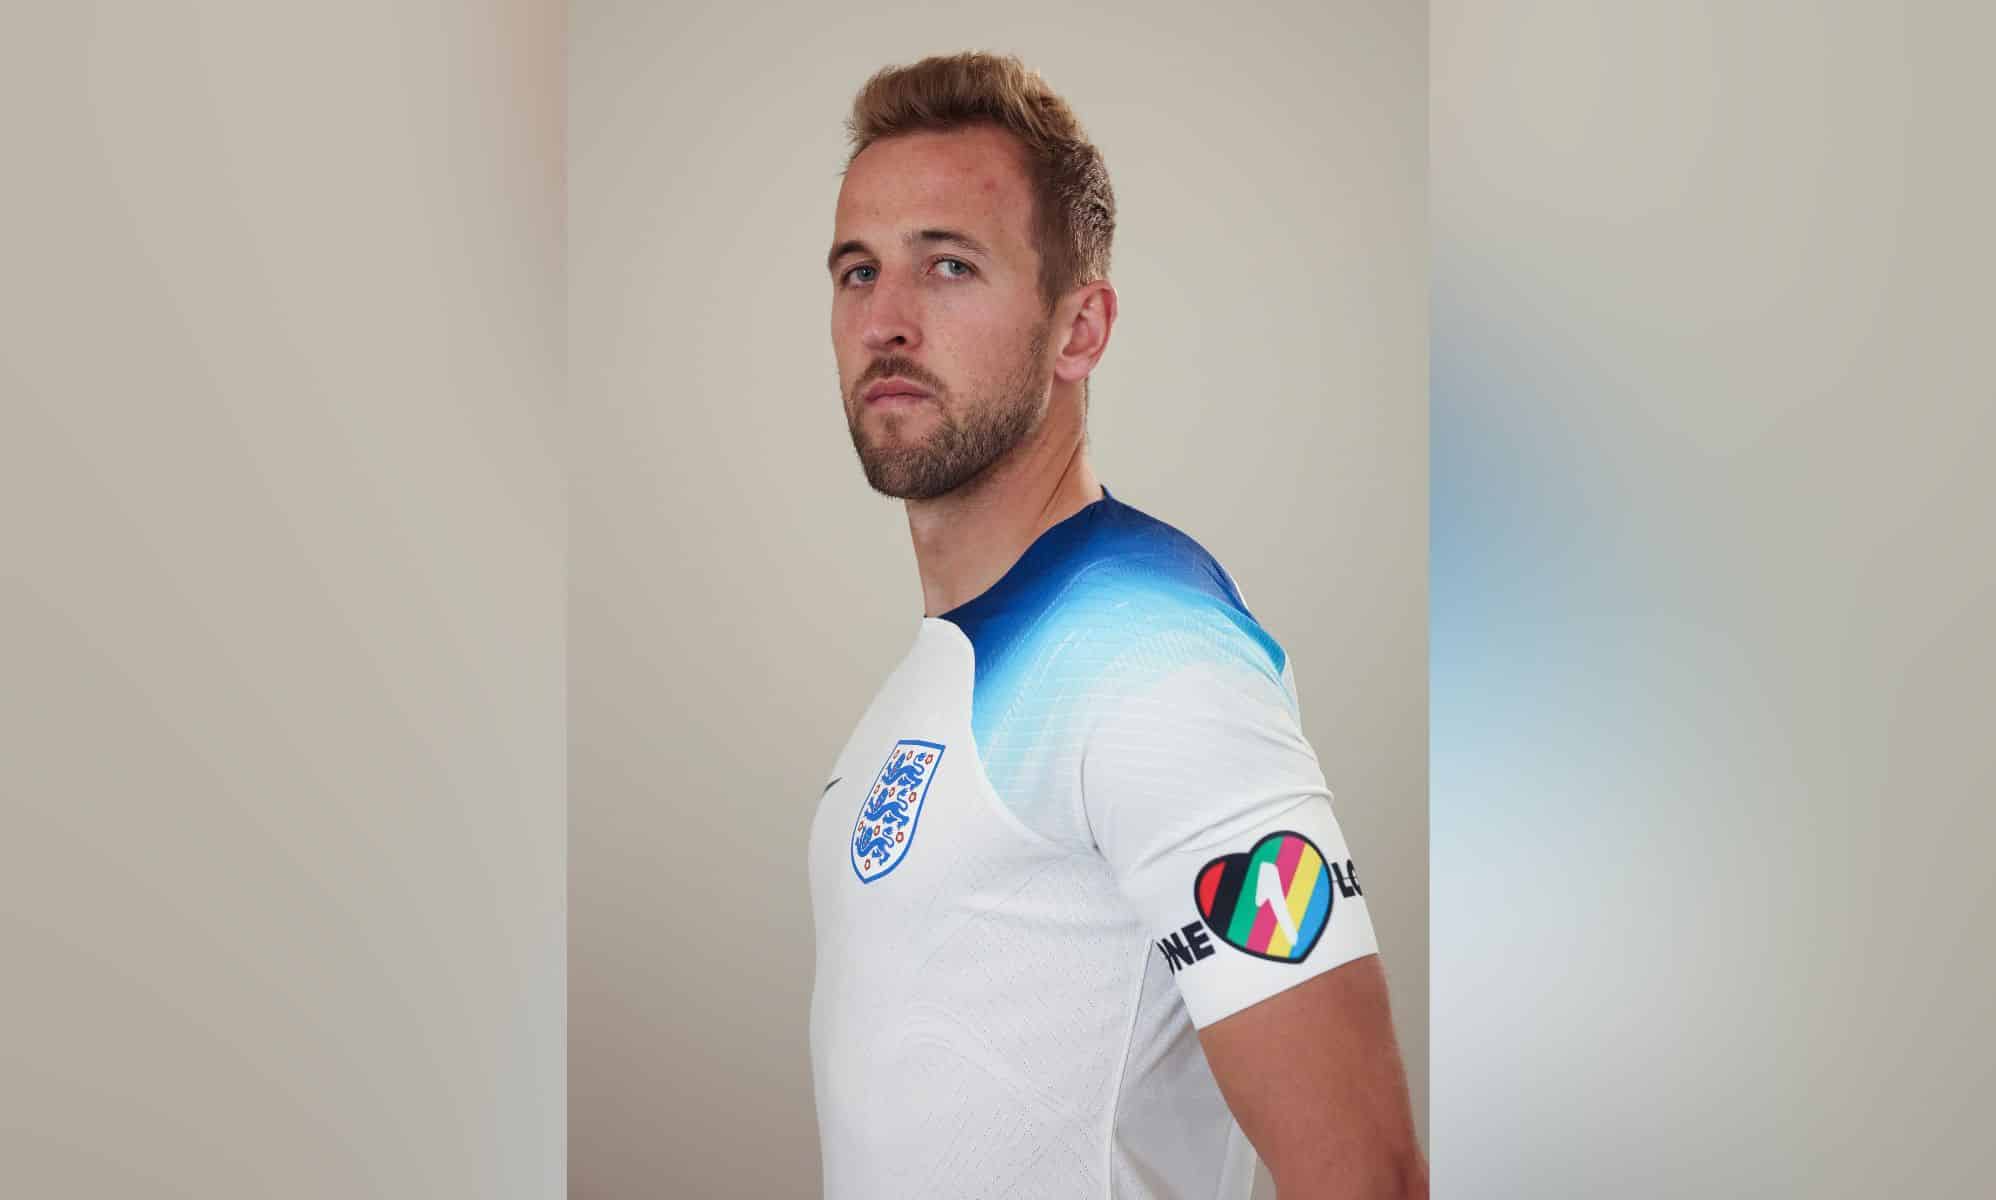 England's Harry Kane to take stand against discrimination at Qatar World Cup